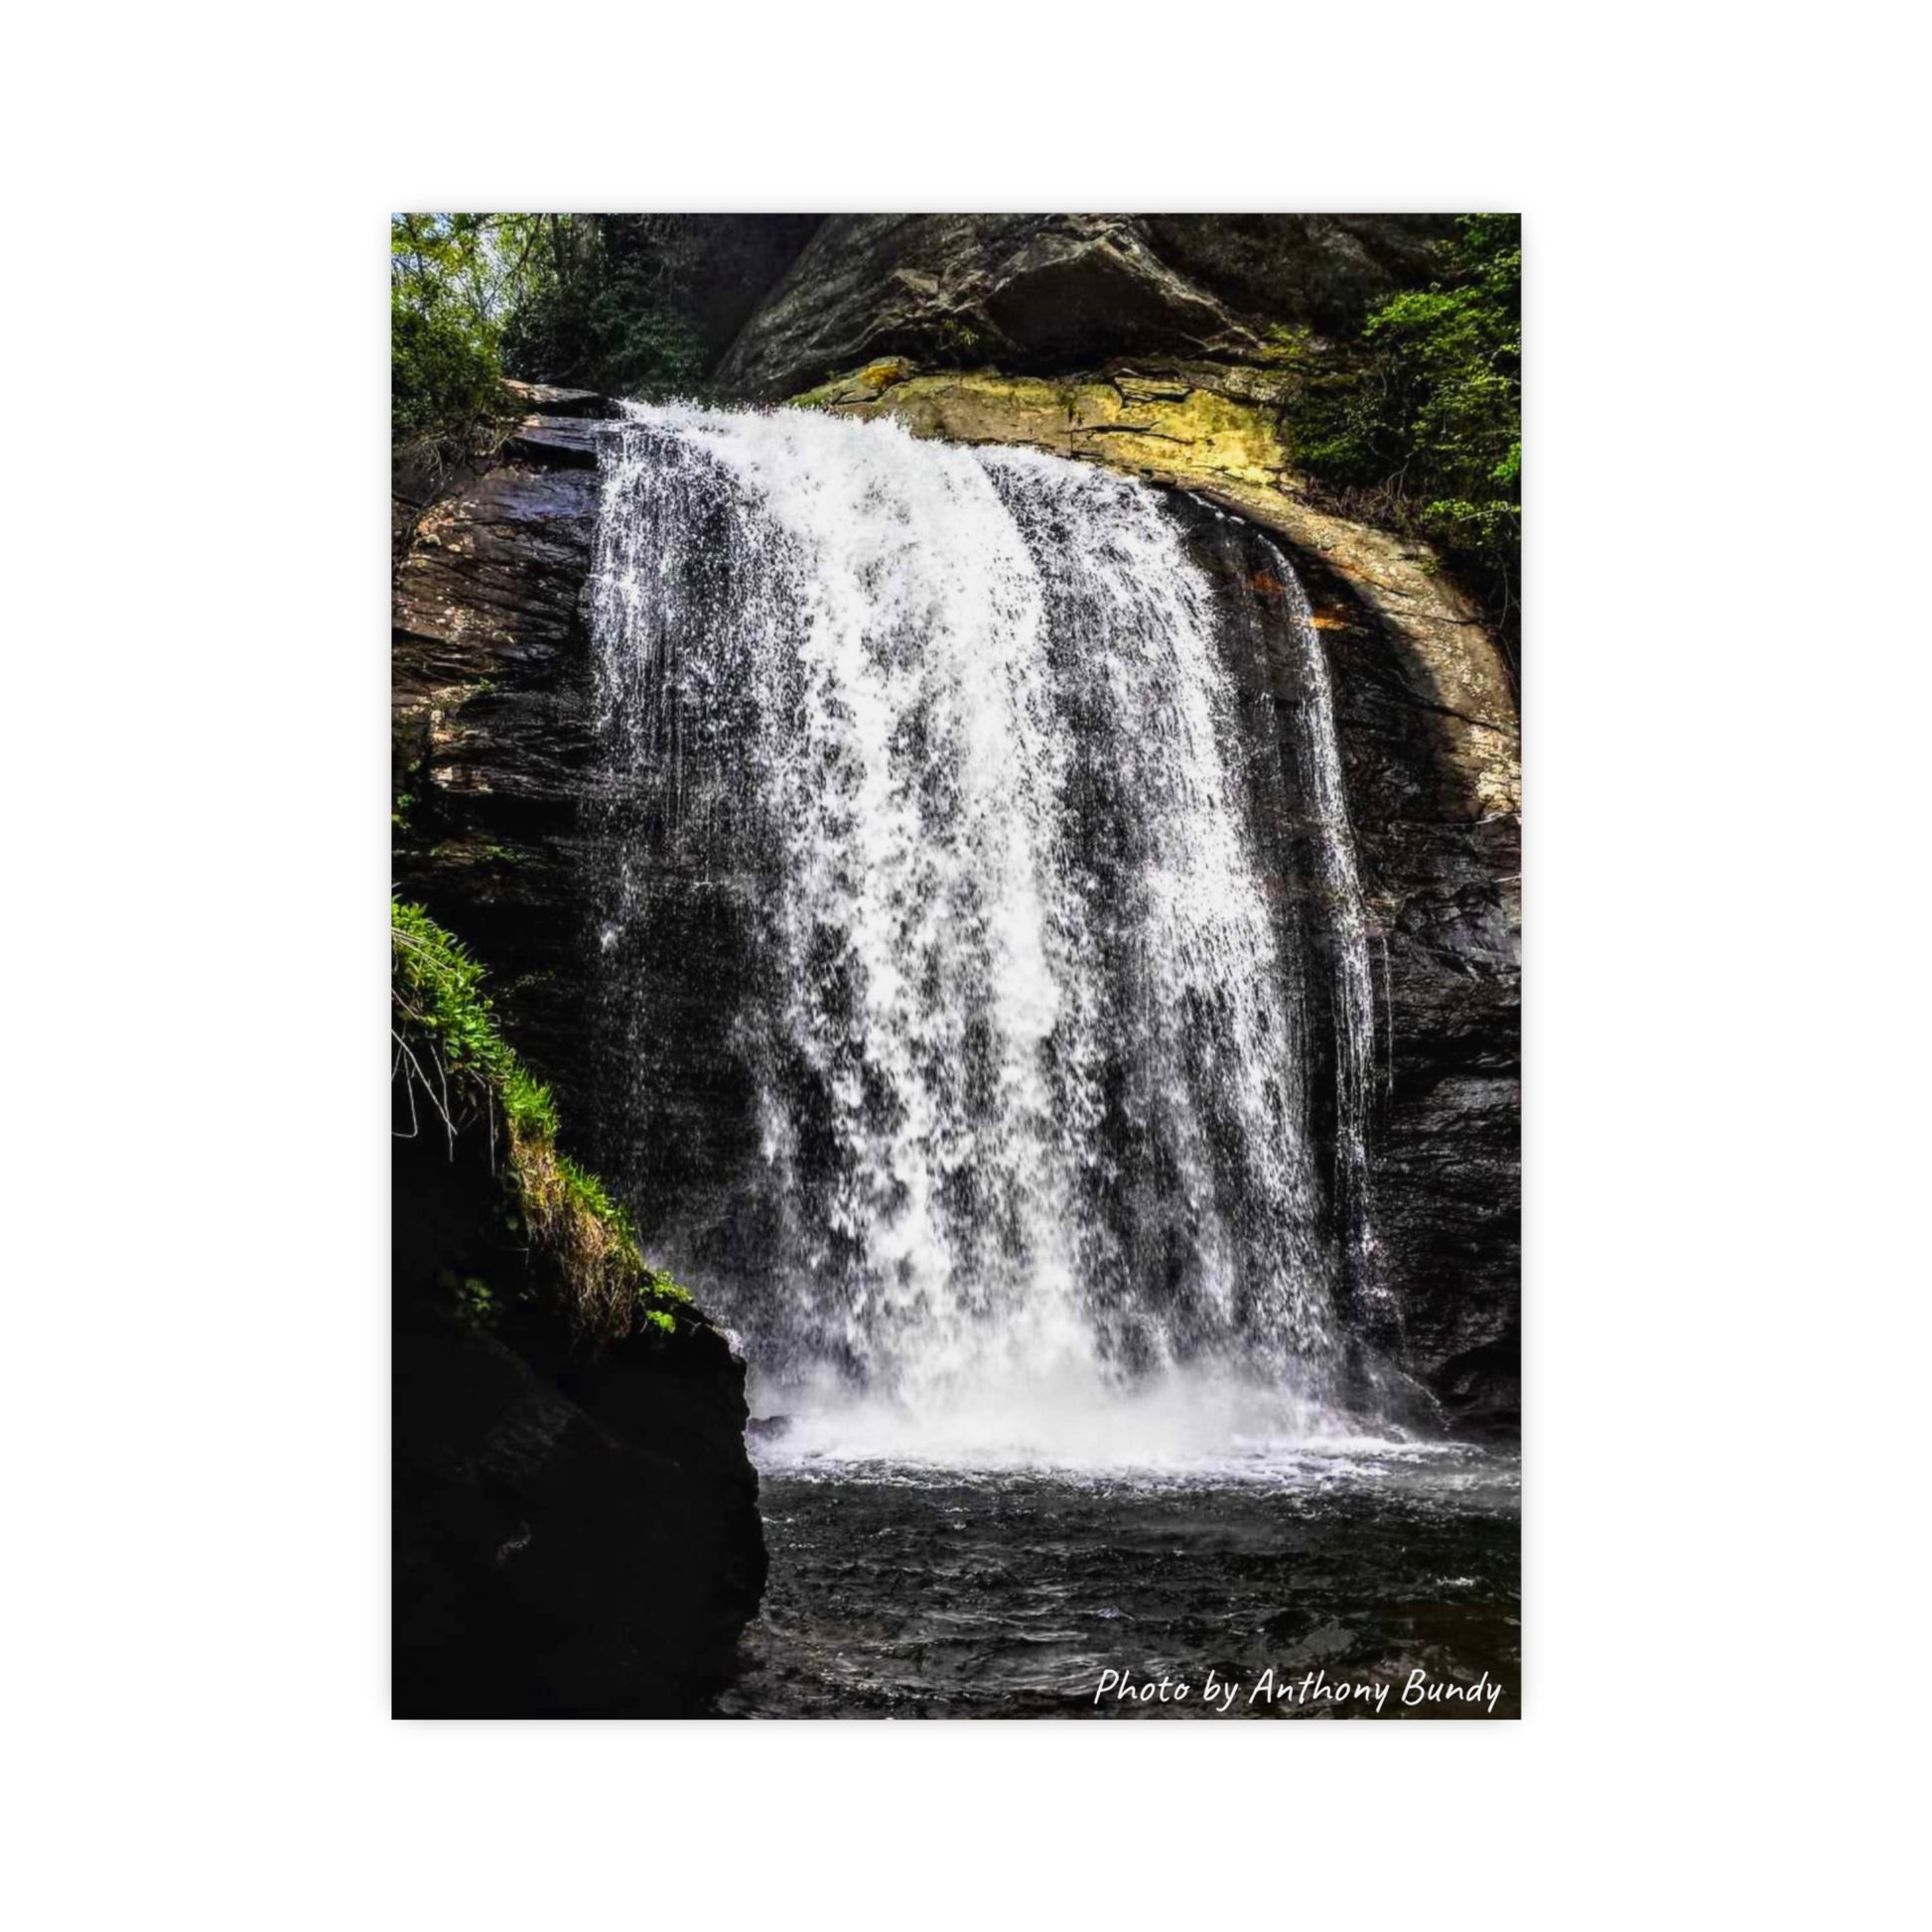 Poster of Waterfall in Asheville, NC, front view.